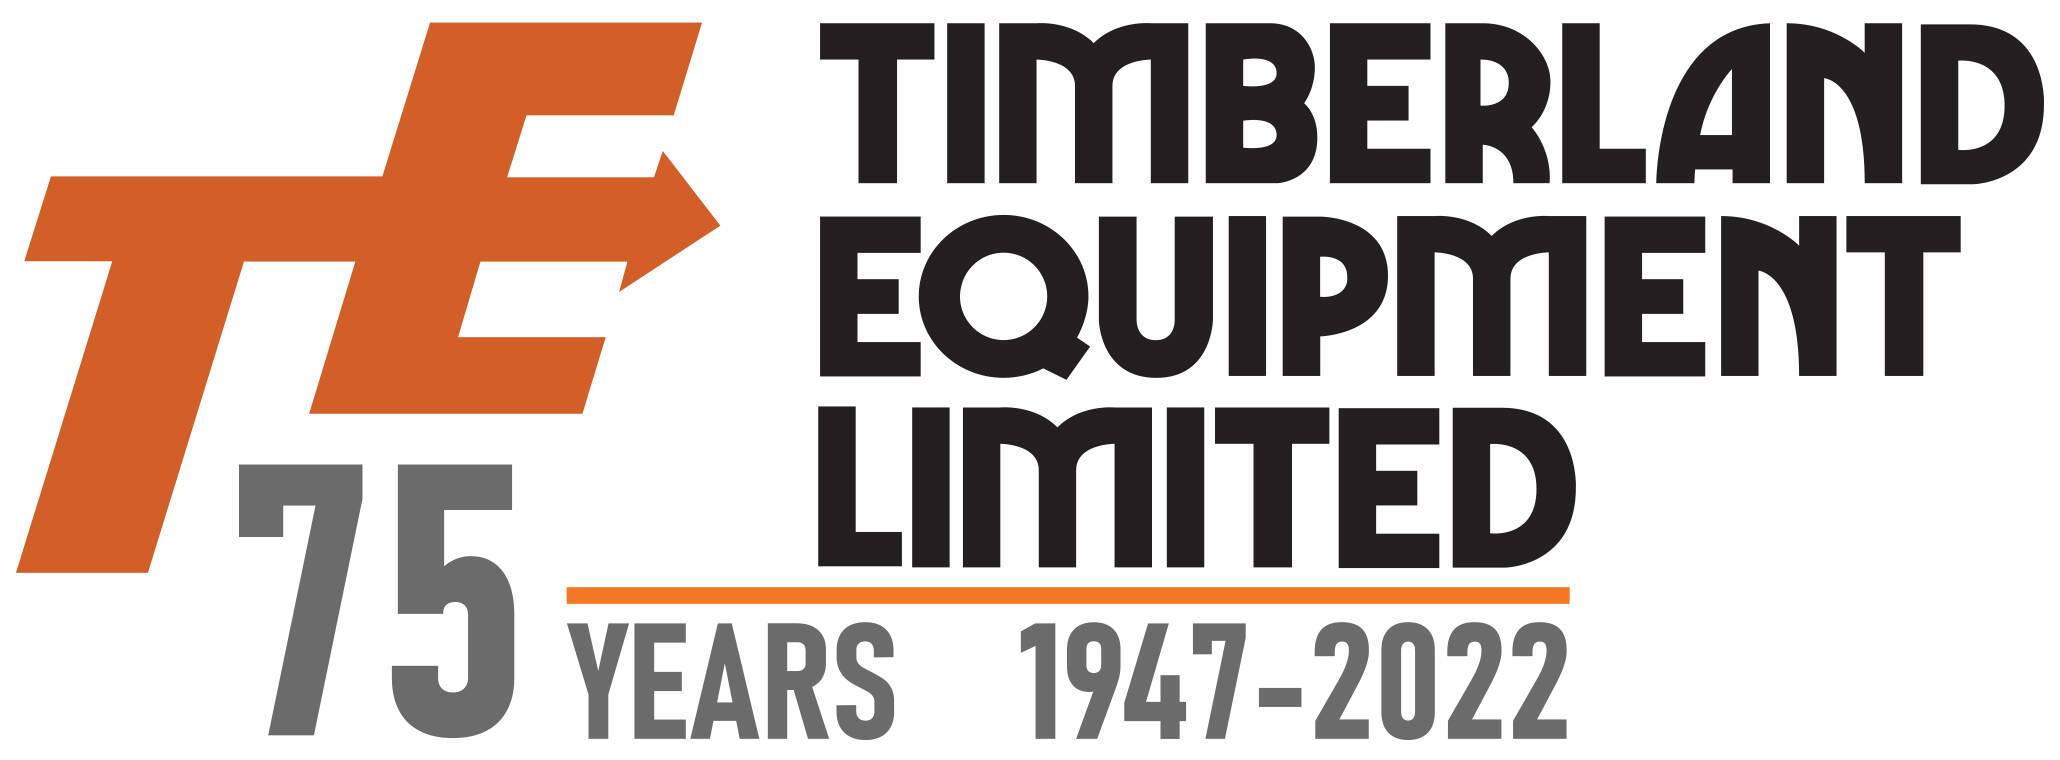 Timberland Equipment Limited